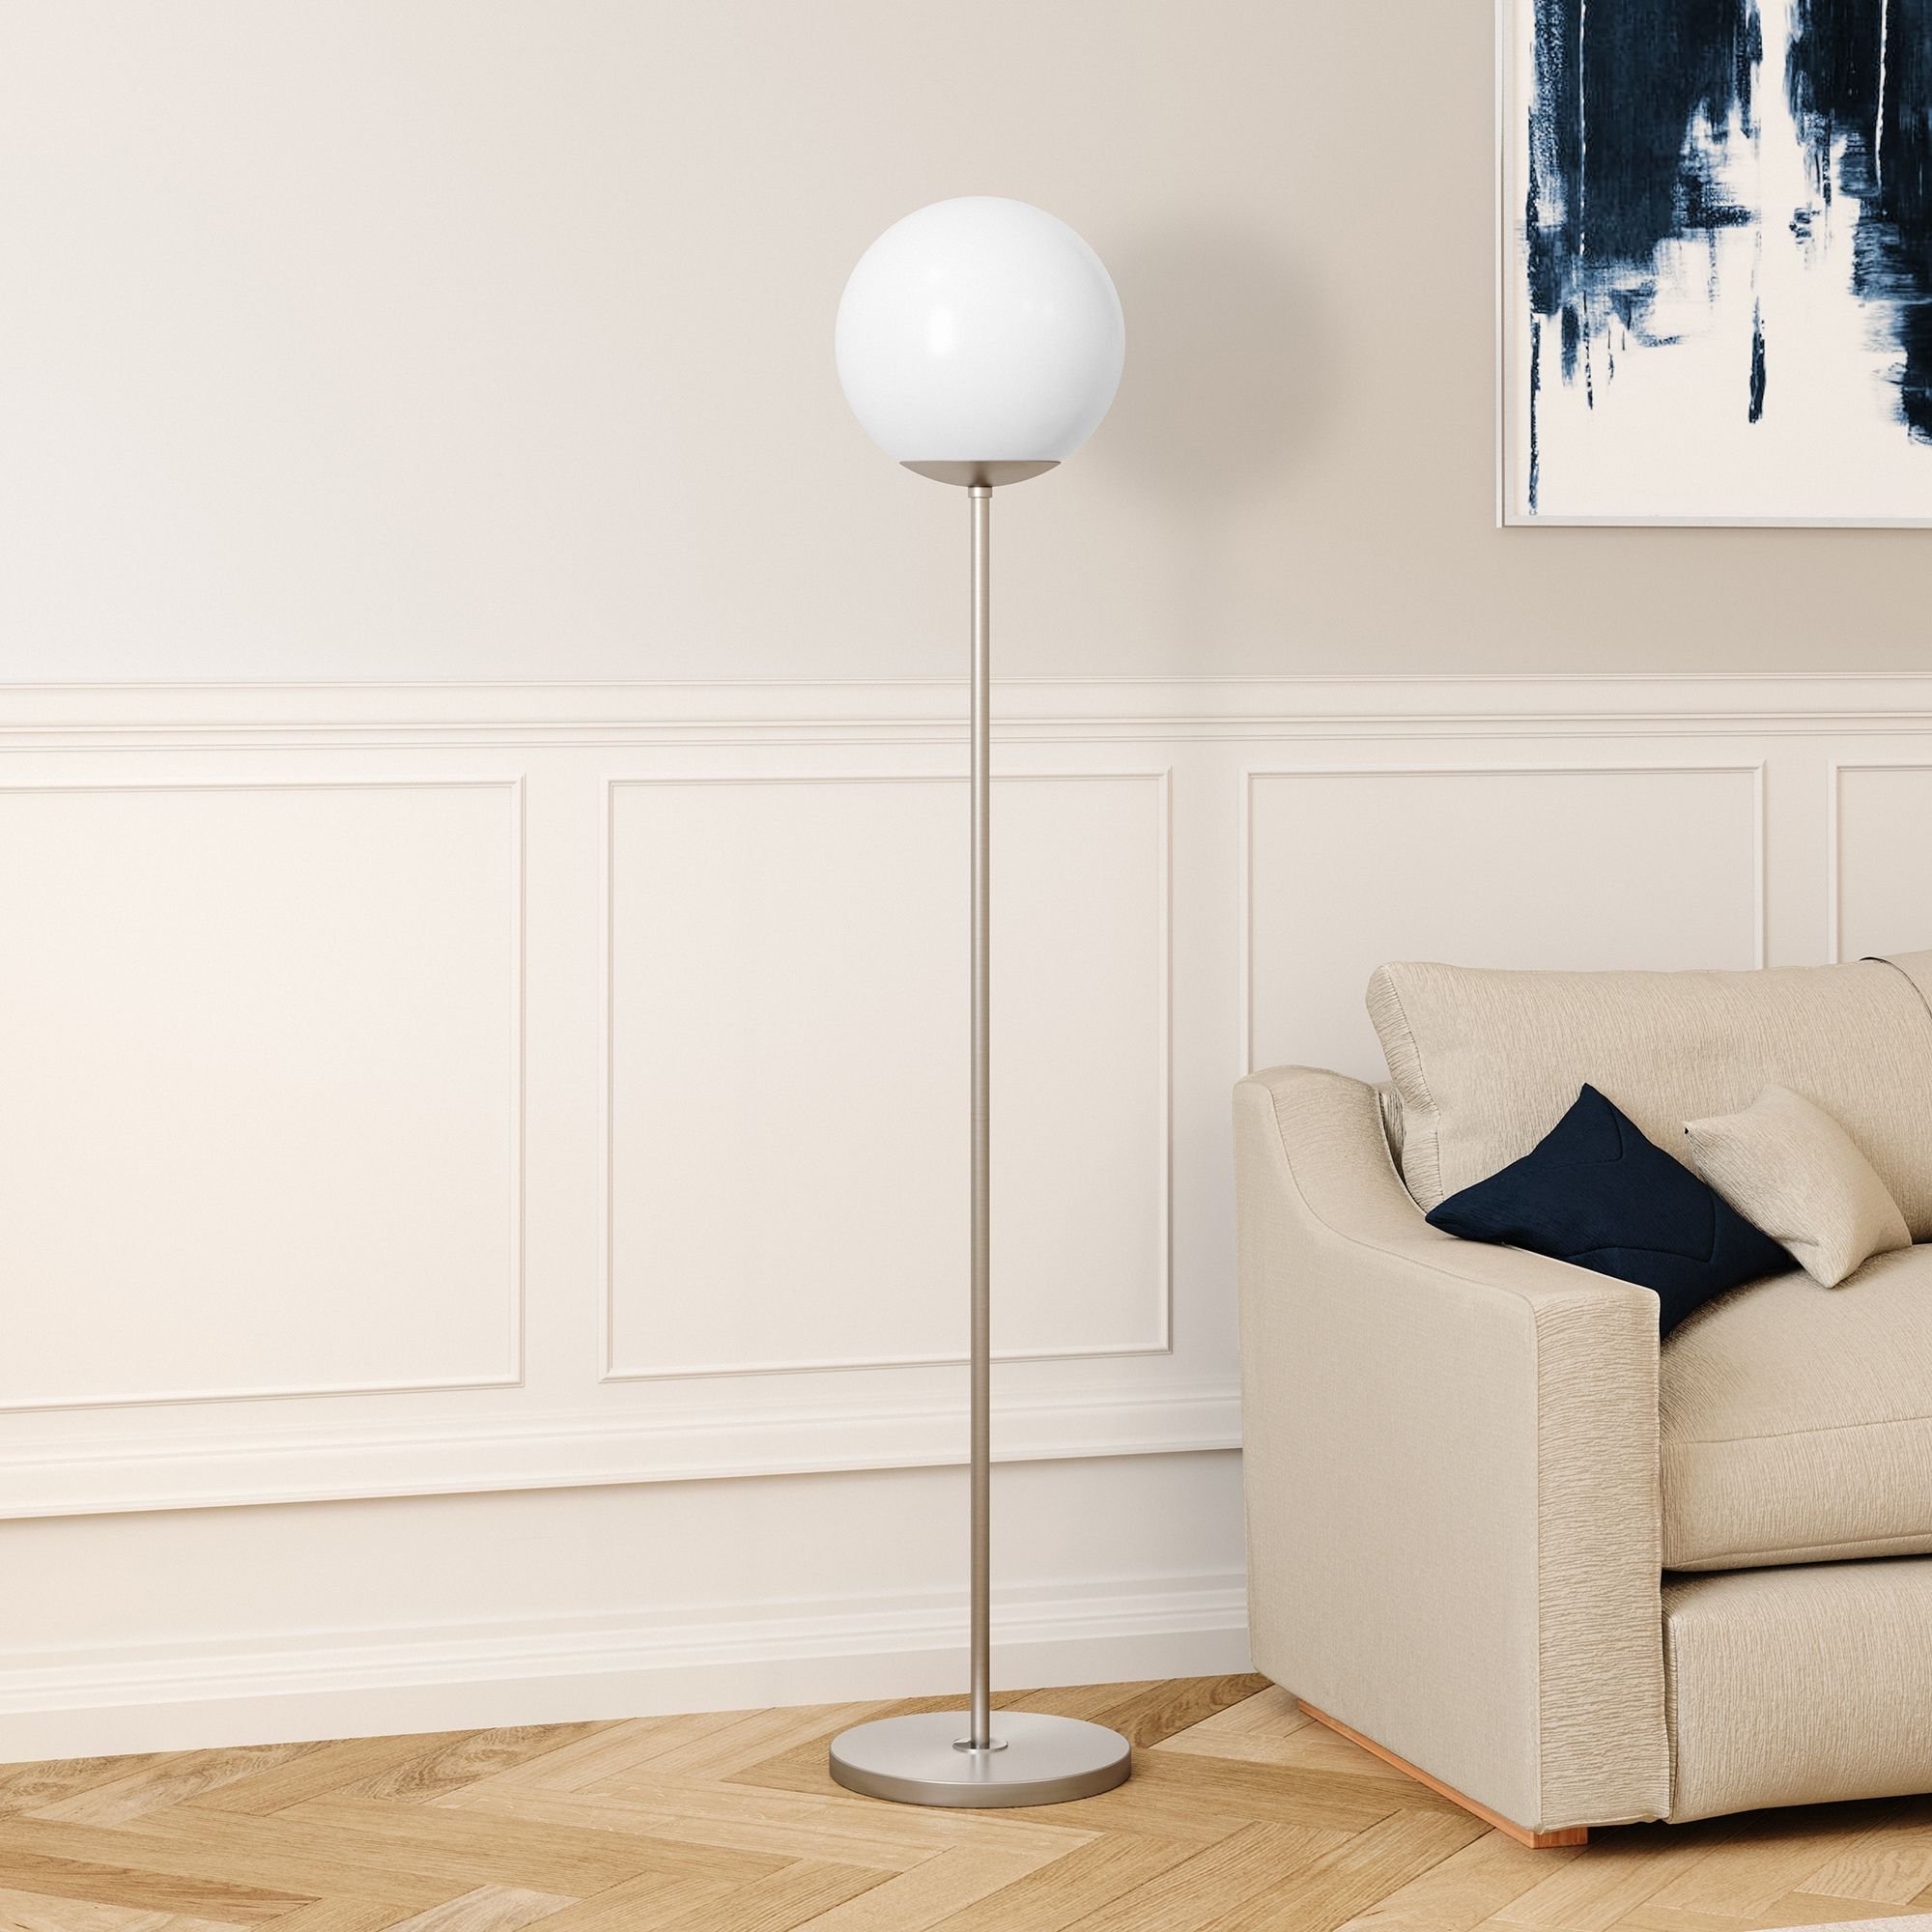 Theia Globe Shade Floor Lamp – On Sale – Overstock – 23572461 Pertaining To Sphere Floor Lamps (View 5 of 20)